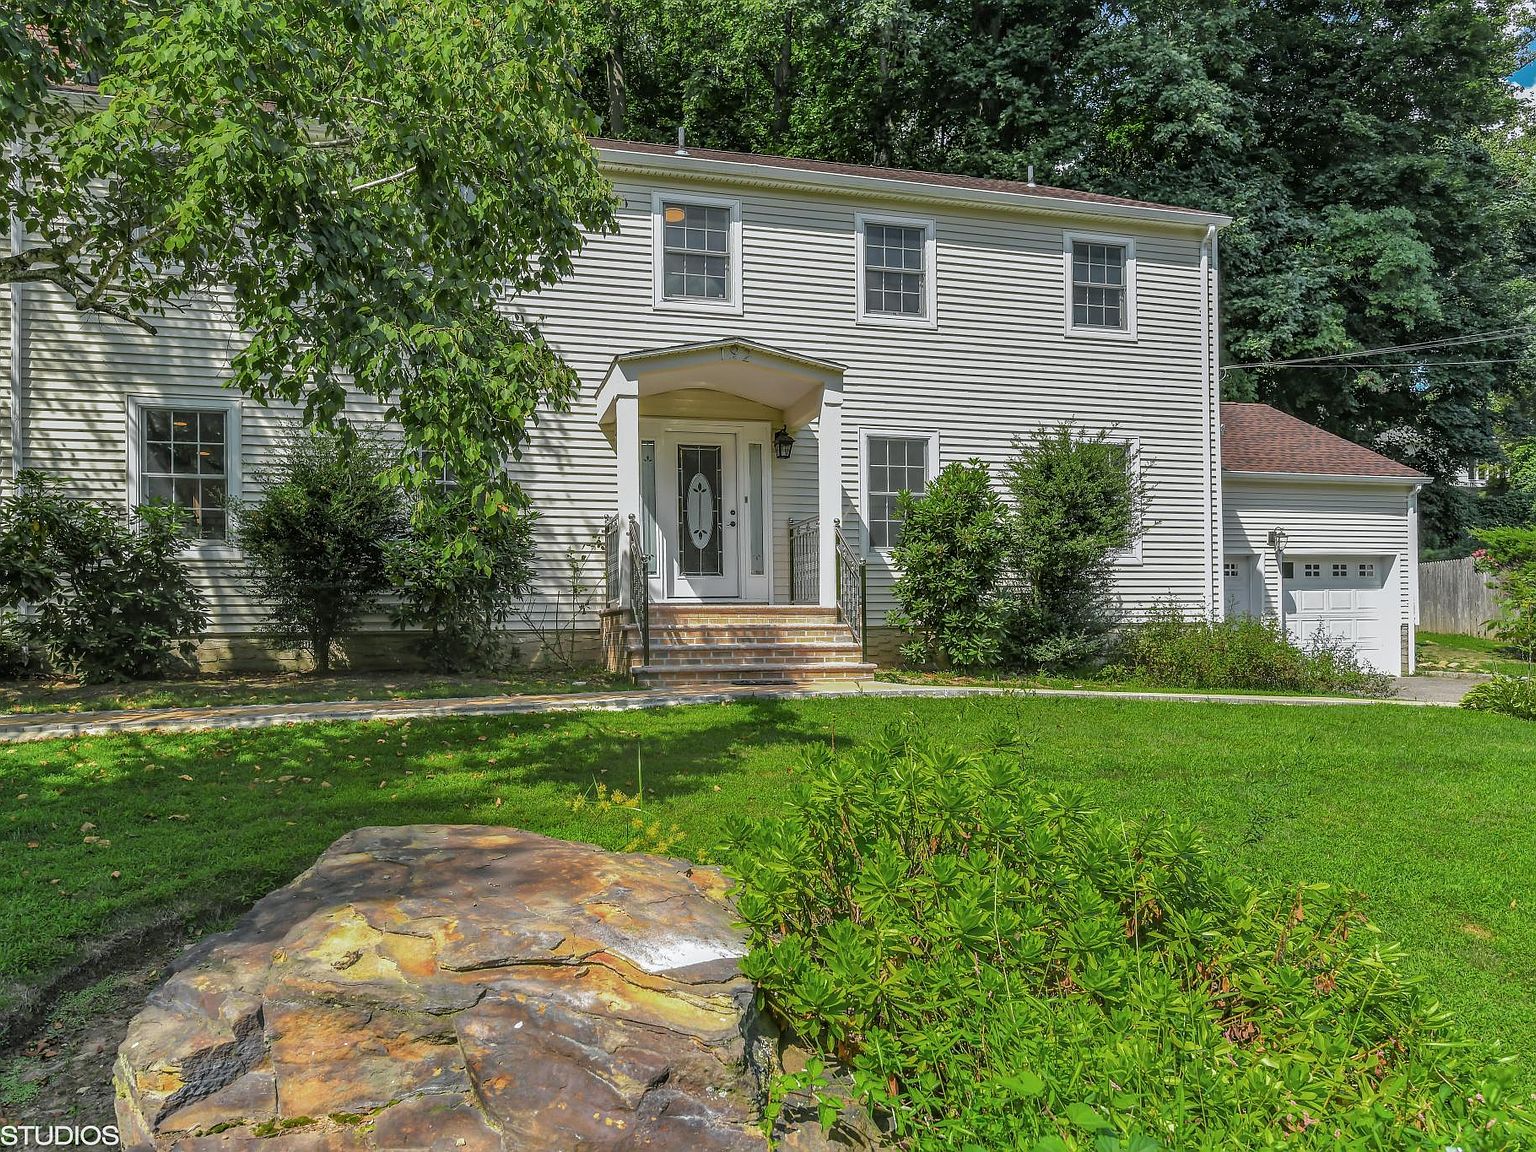 Undisclosed Address), New Rochelle, NY 10804 | Zillow